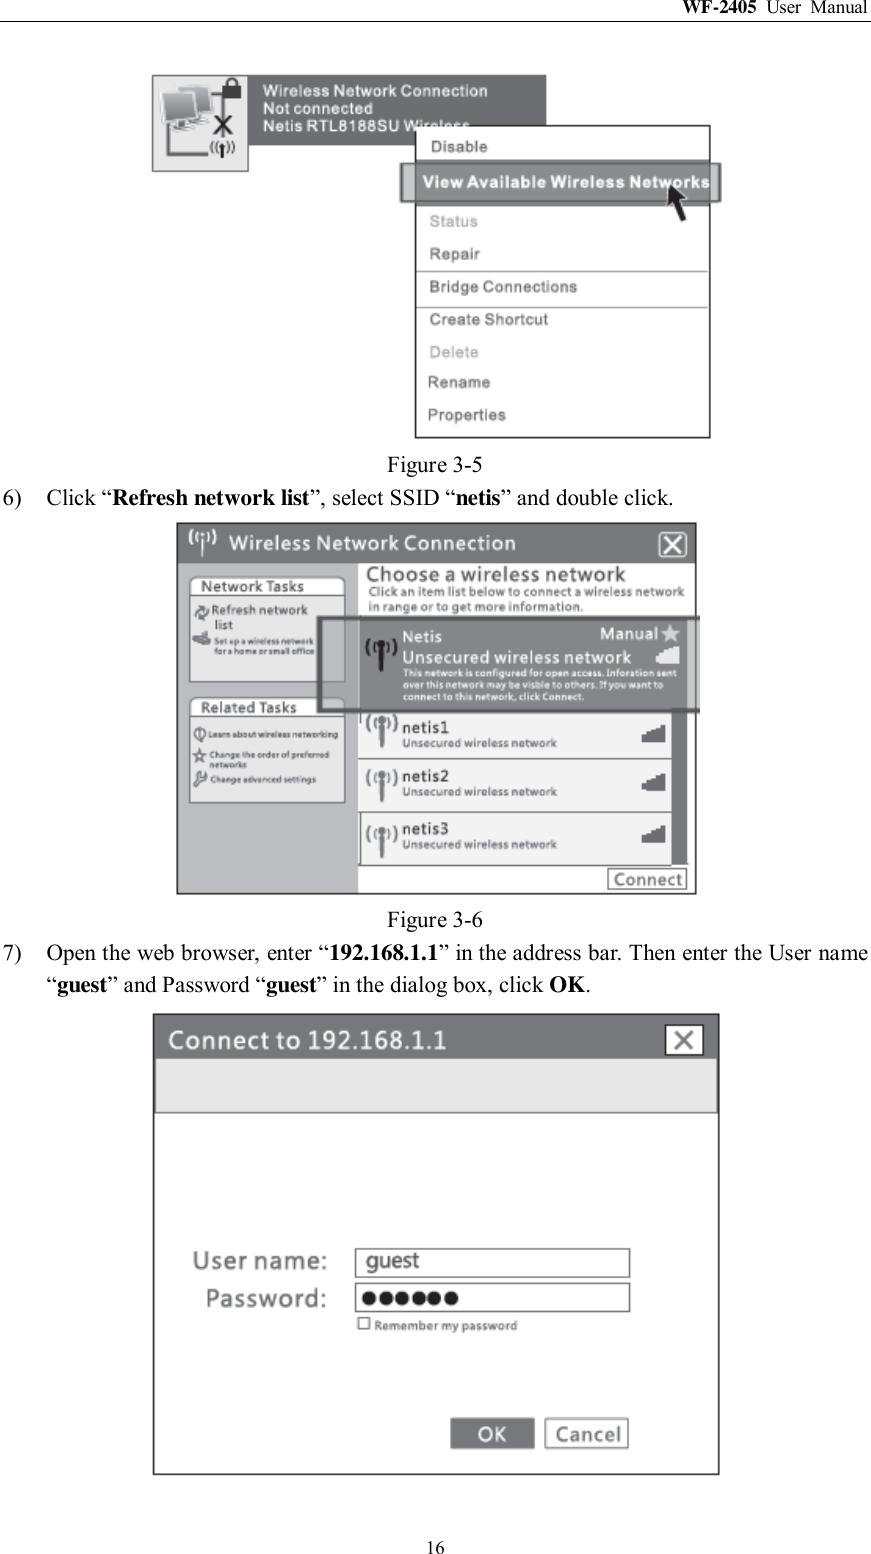 WF-2405  User  Manual  16  Figure 3-5 6) Click “Refresh network list”, select SSID “netis” and double click.  Figure 3-6 7) Open the web browser, enter “192.168.1.1” in the address bar. Then enter the User name “guest” and Password “guest” in the dialog box, click OK.  